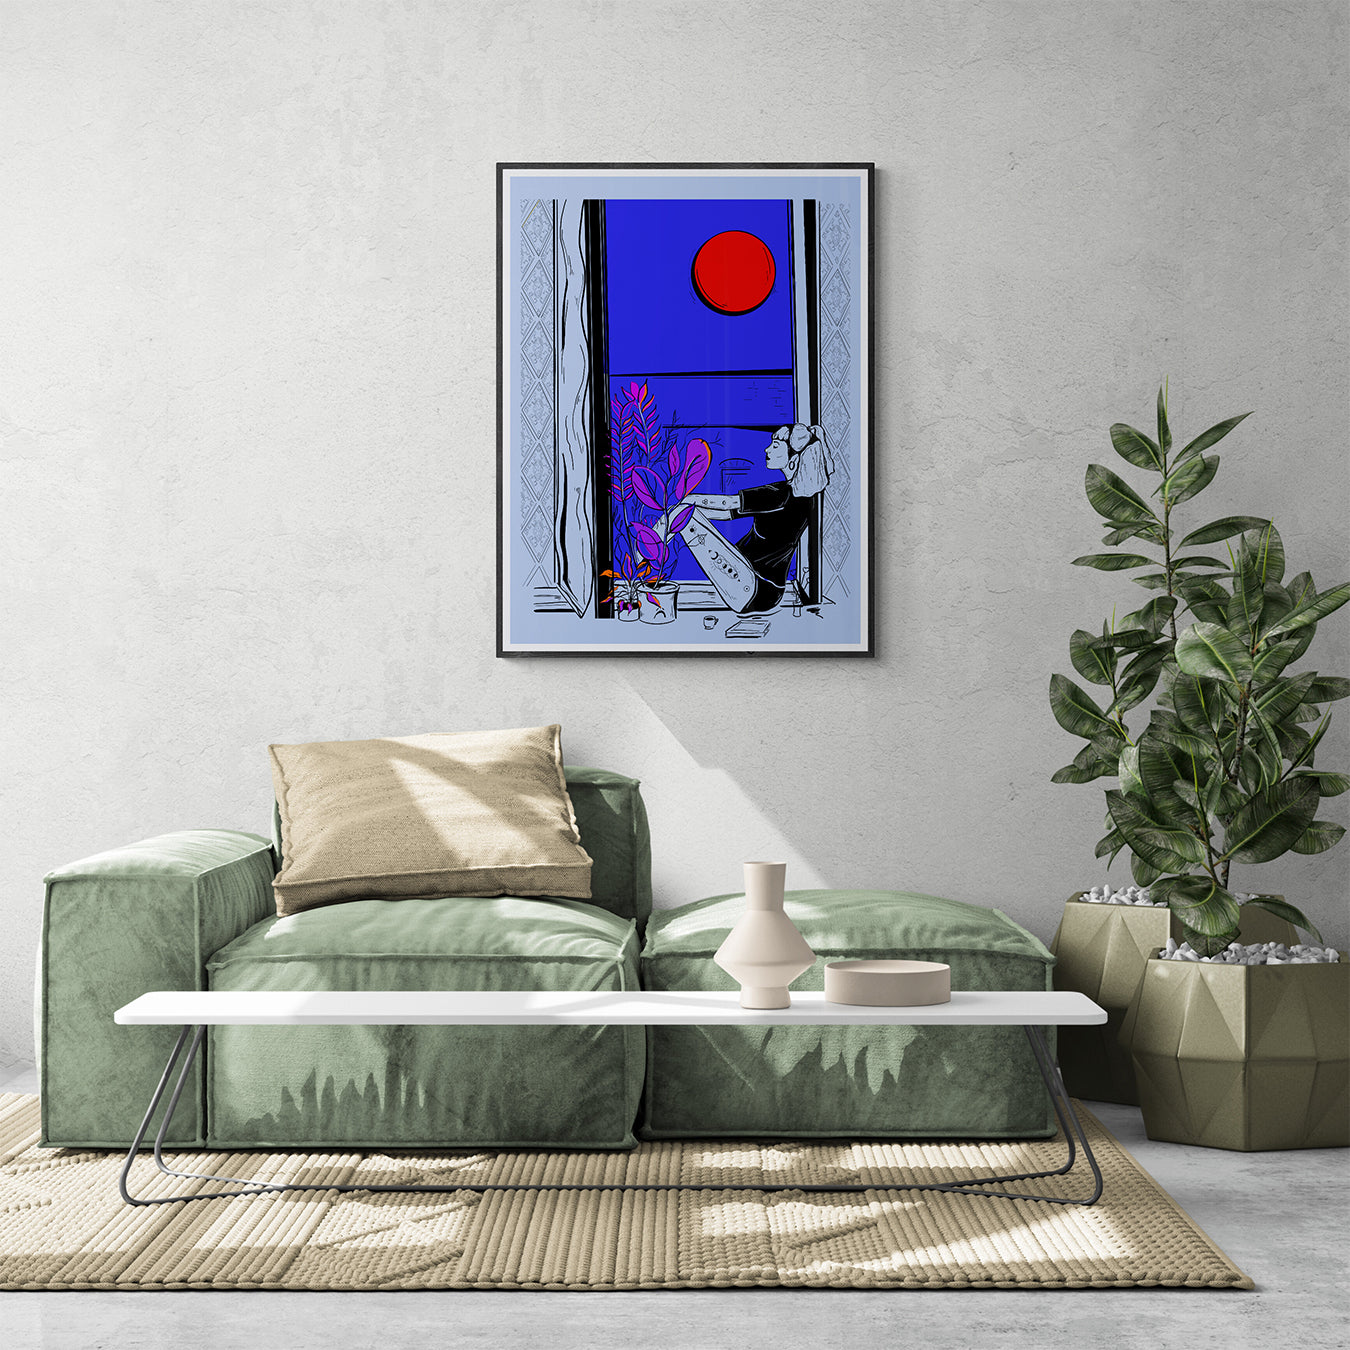 Courtney L Ellis Illustrations Art print by LGBTQ+ Illustration Artist Courtney Ellis. Wall art home decor and gifts. Blue Artwork of a tattooed girl sitting by her city window calmly reflecting with her plants and coffee vibrant colours and soulful